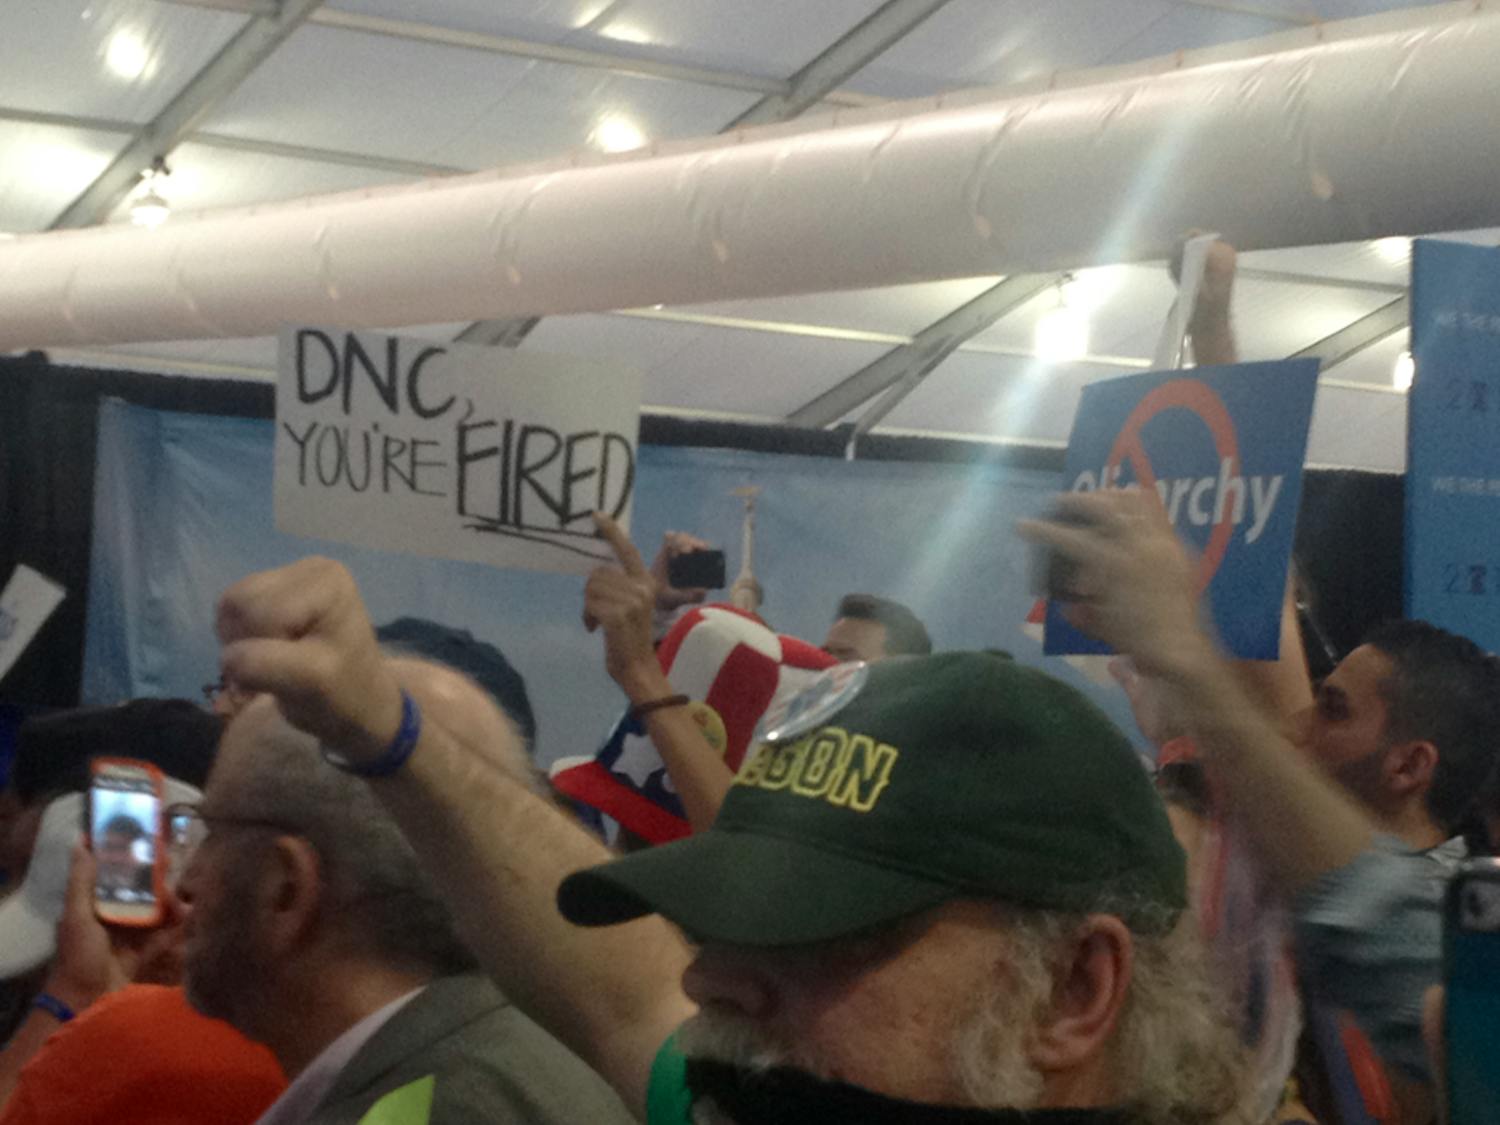 Bernie Sanders delegates protest inside the media center at the Democratic National Convention in Philadelphia on July 26, 2016.